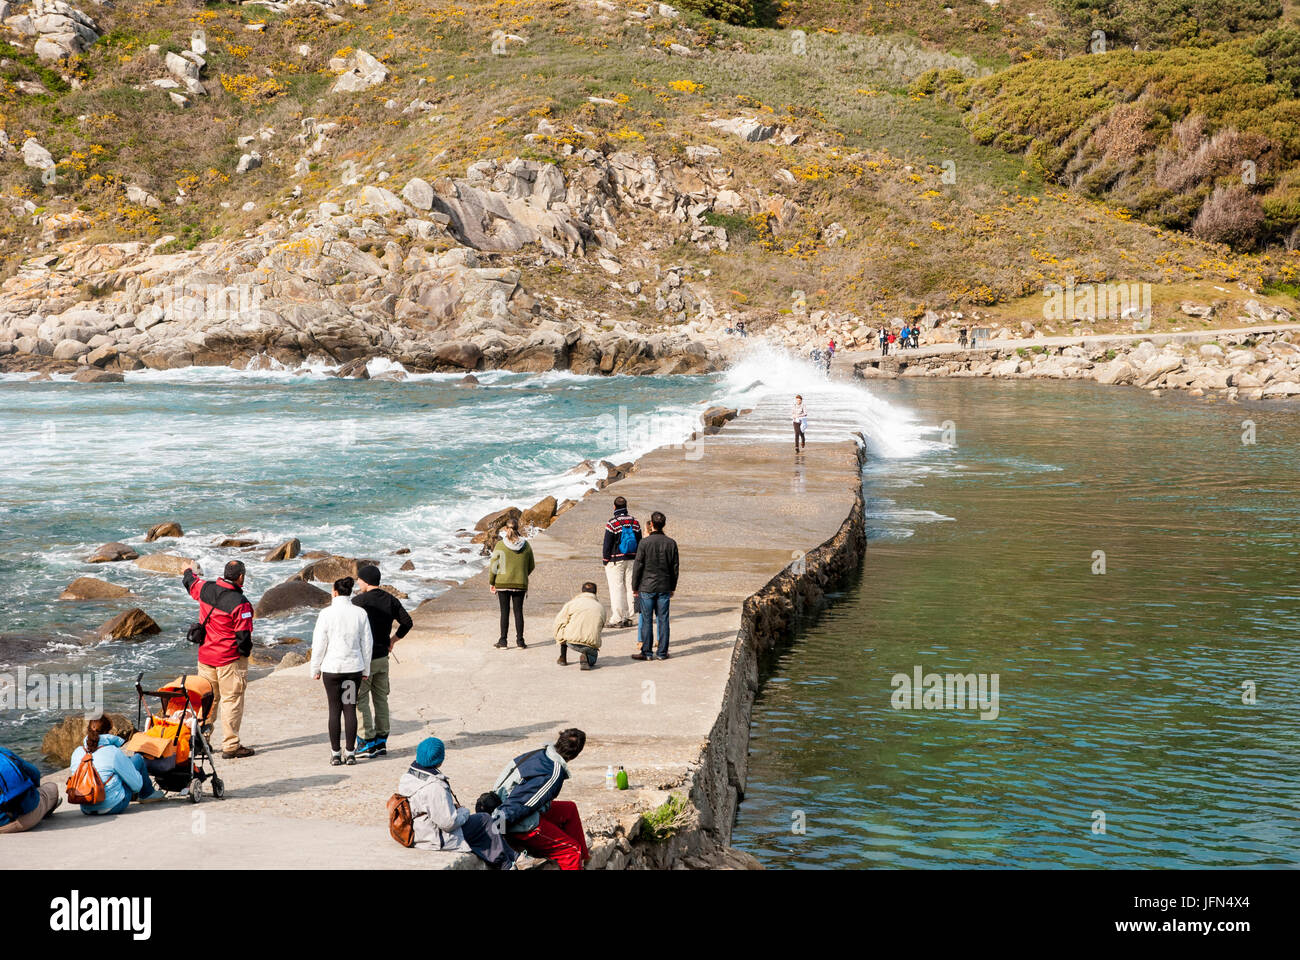 VIGO, SPAIN - APRIL 7: People waiting to cross the path on the sea without getting wet by the wave. Taken at Cies islands natural park, Galicia, Spain Stock Photo